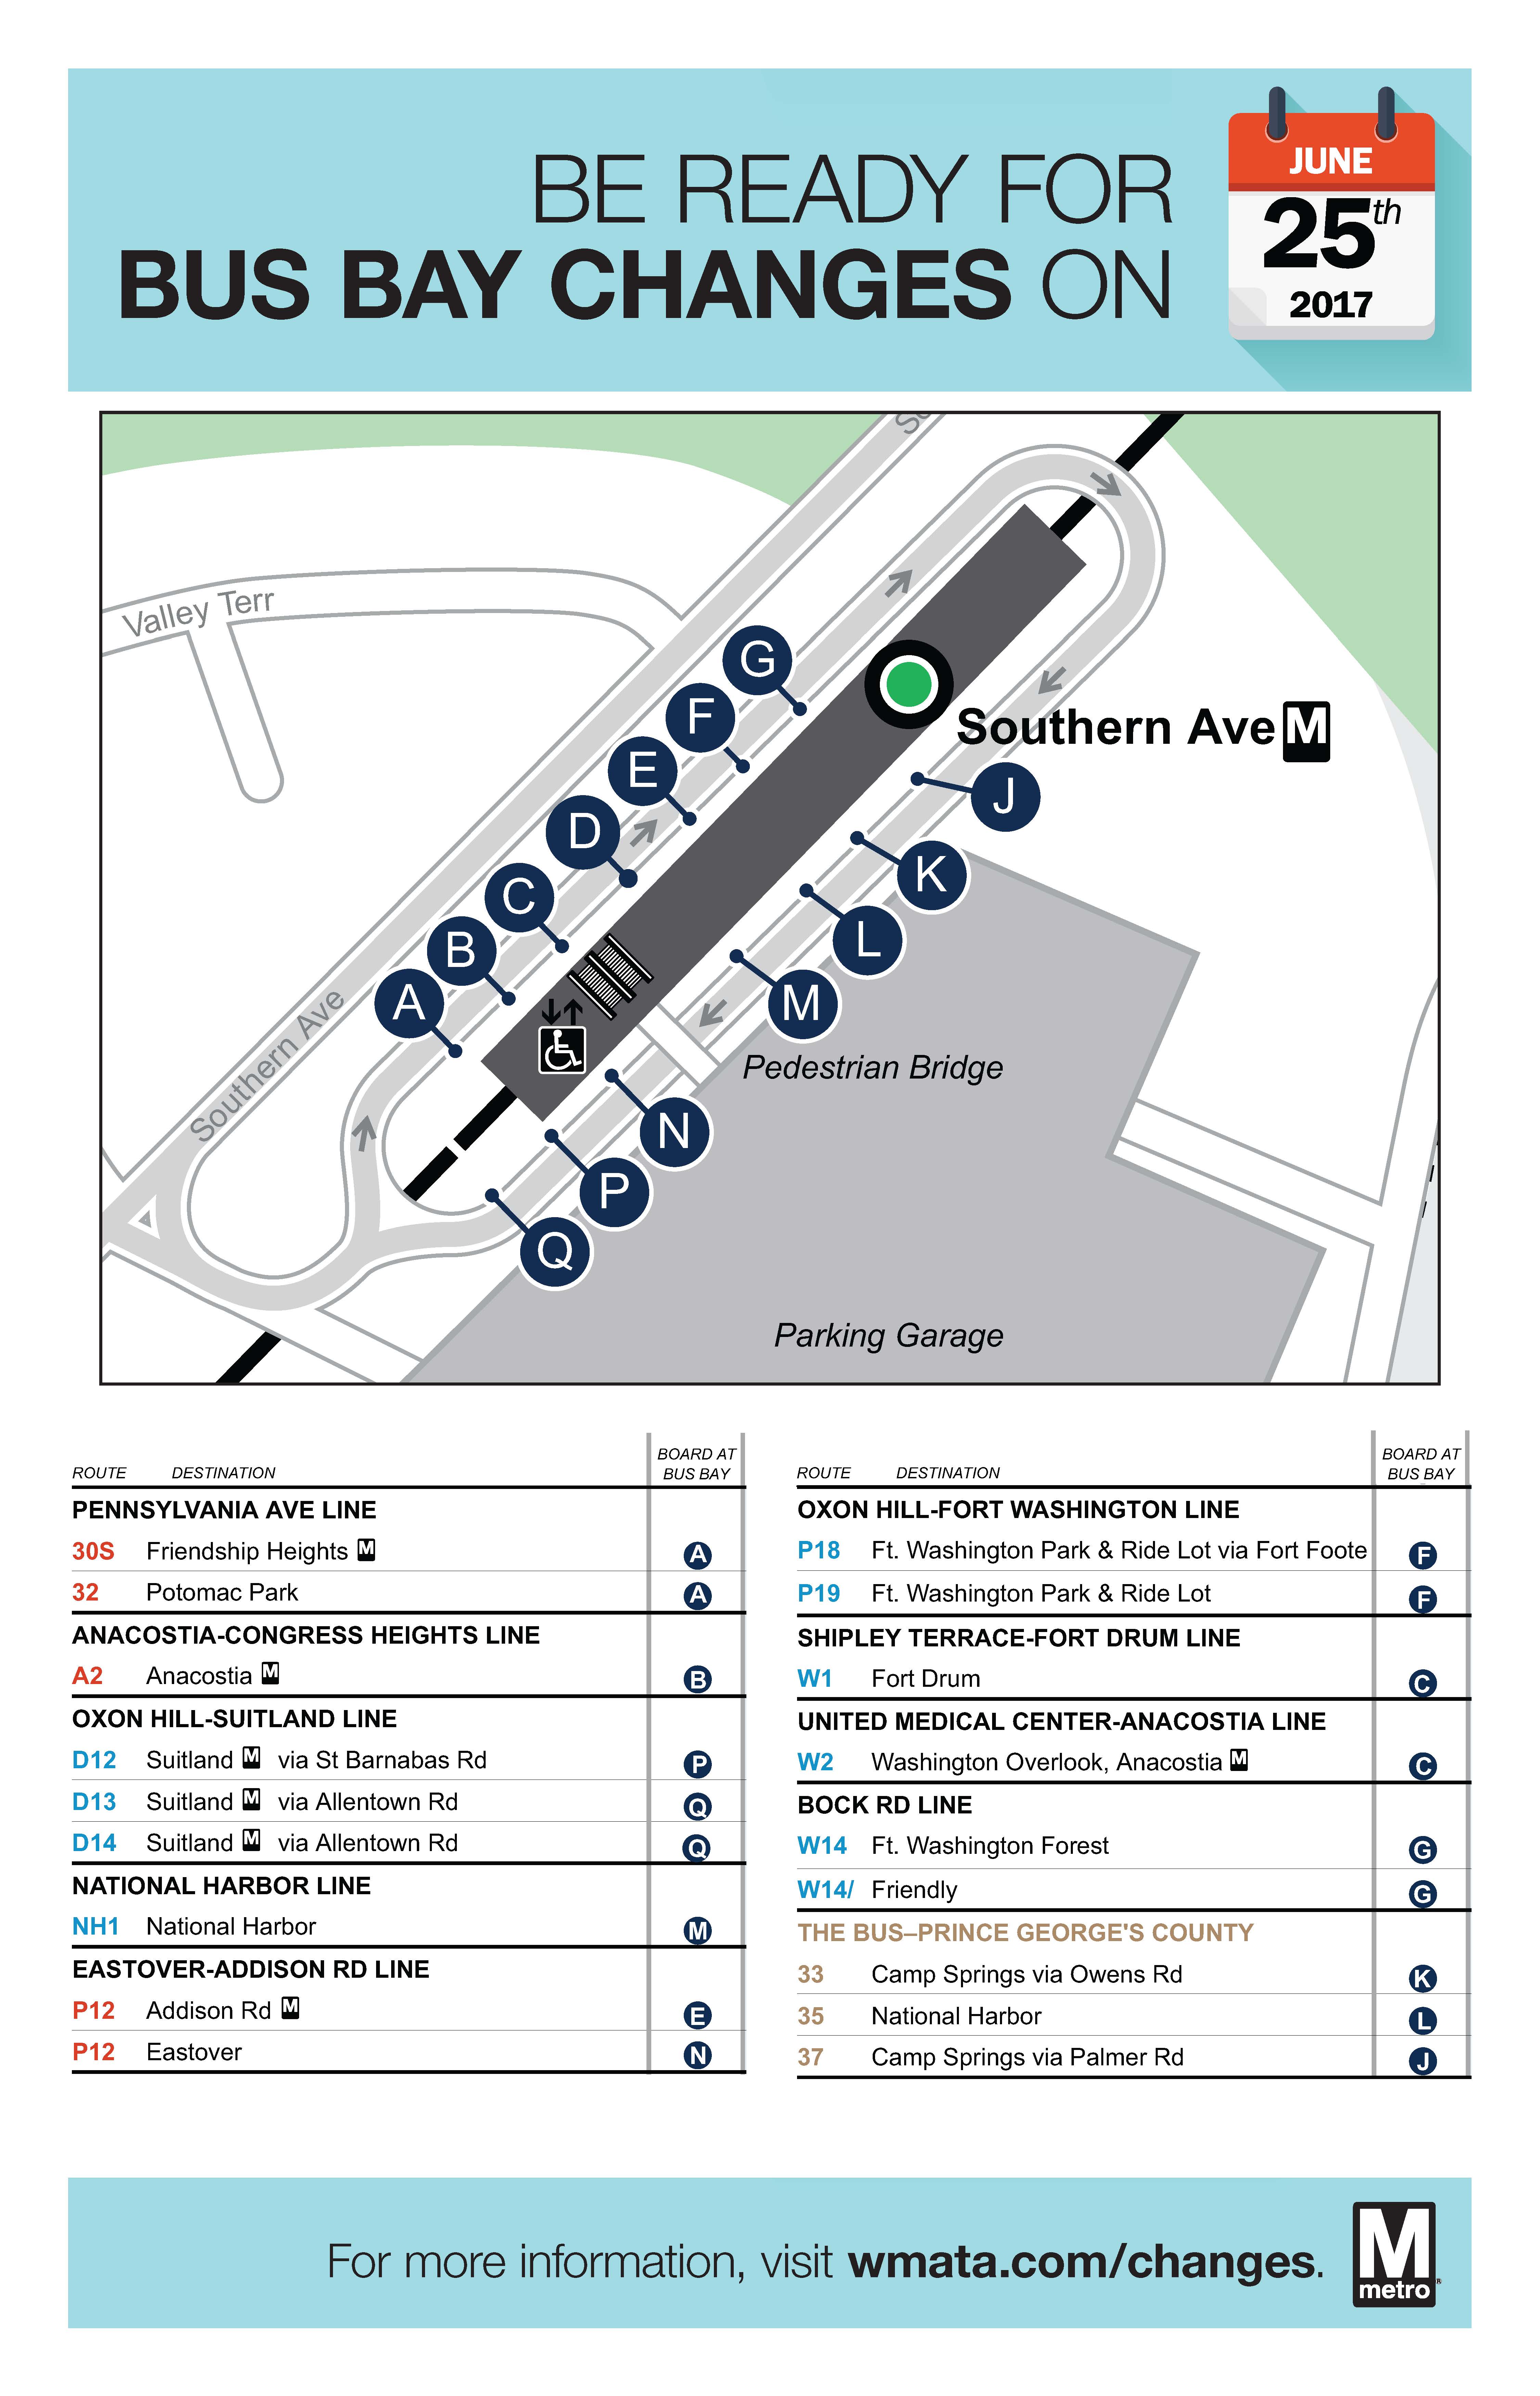 Southern Ave Bus Bay Reassignments June 25